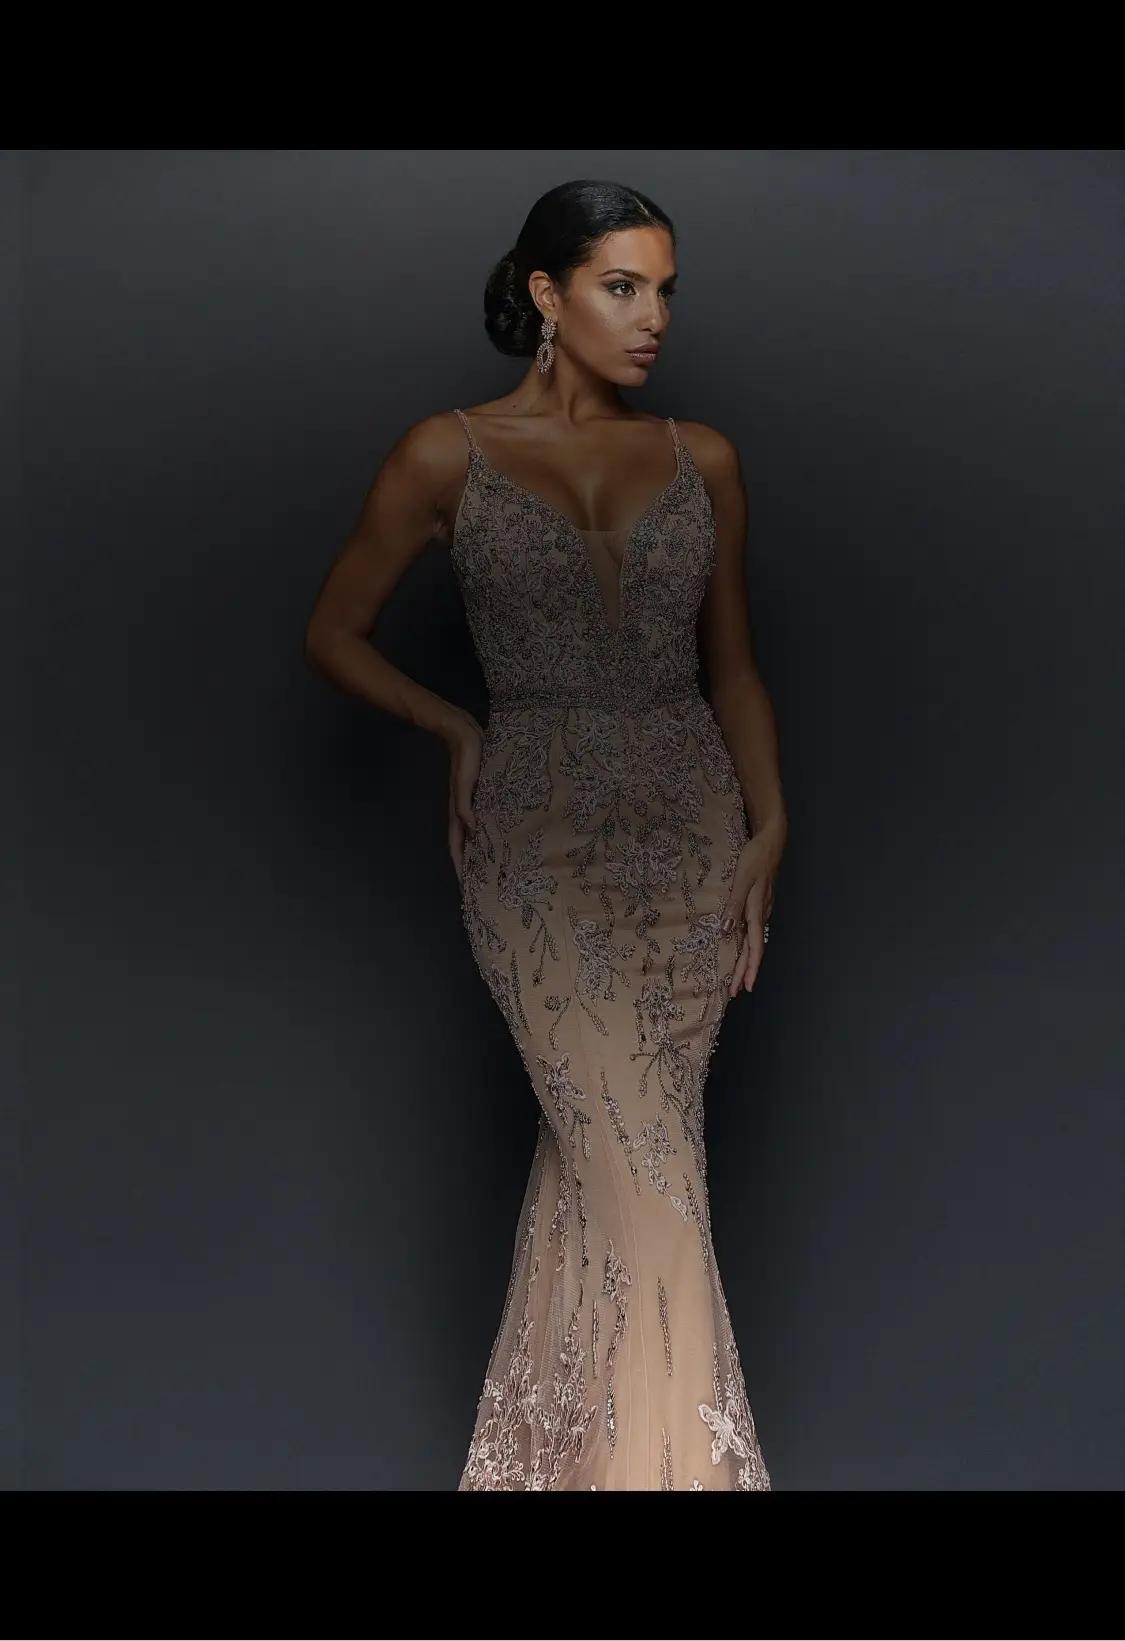 Photo of the model wearing an evening gown - Mobile Image